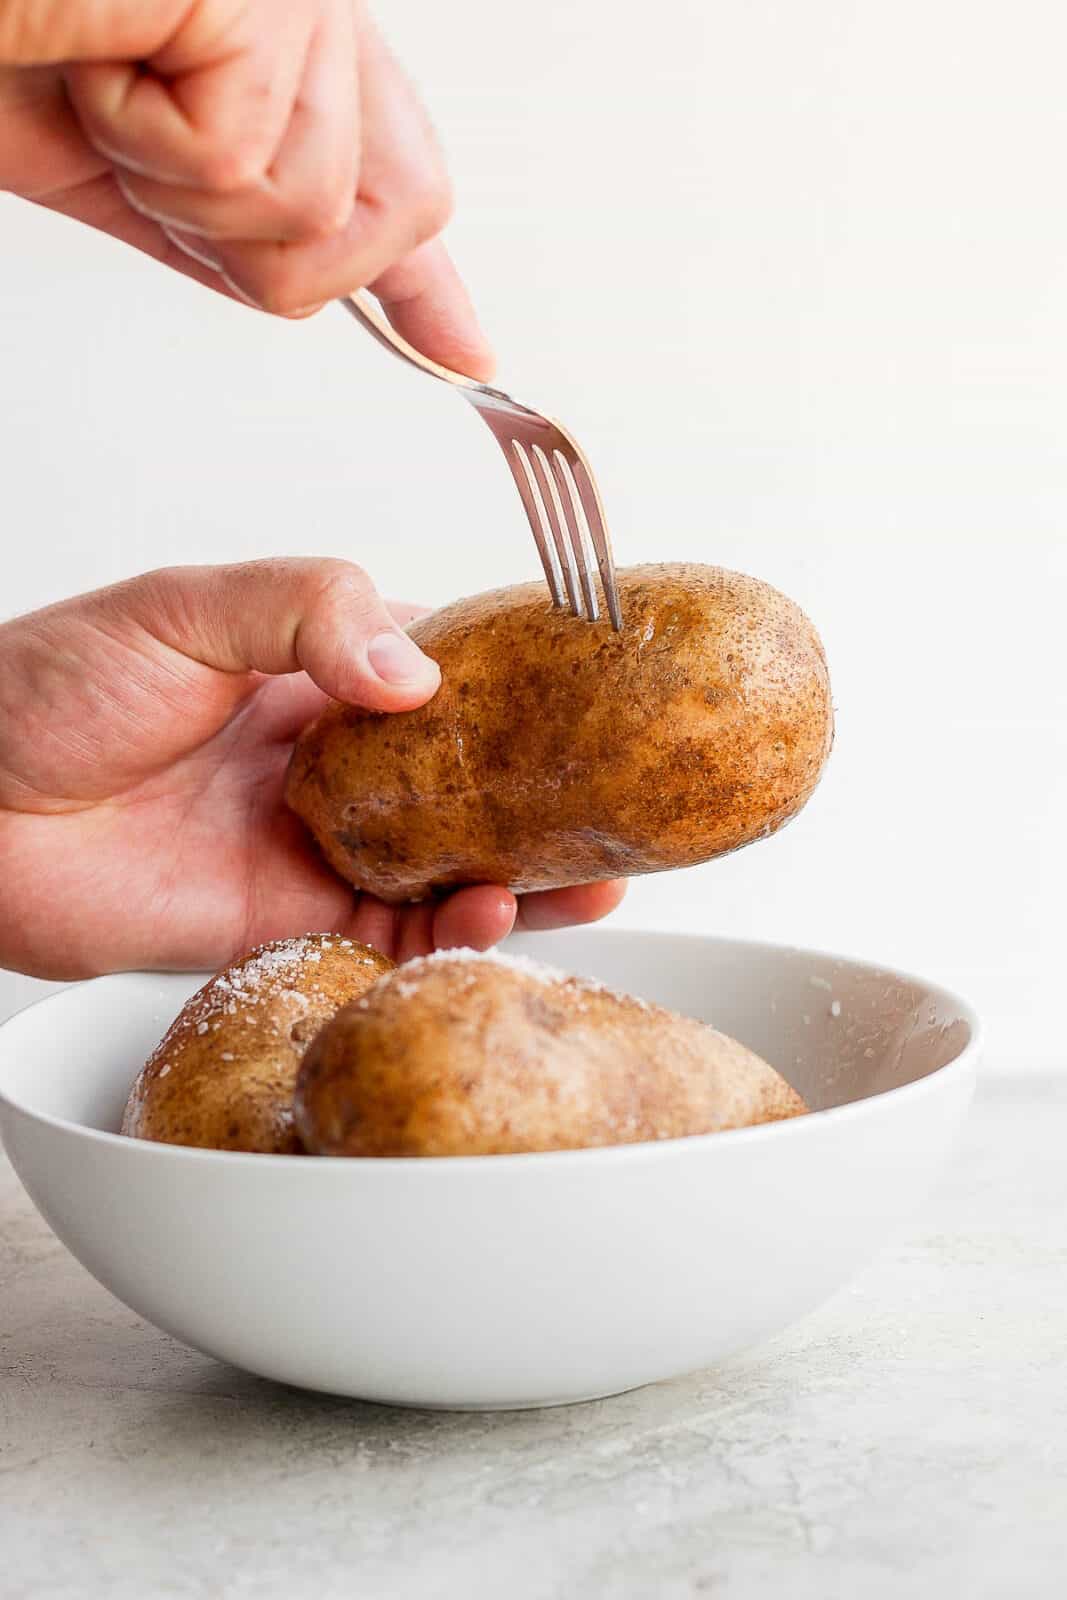 A hand holding a potato while another hand pierces it with a fork.